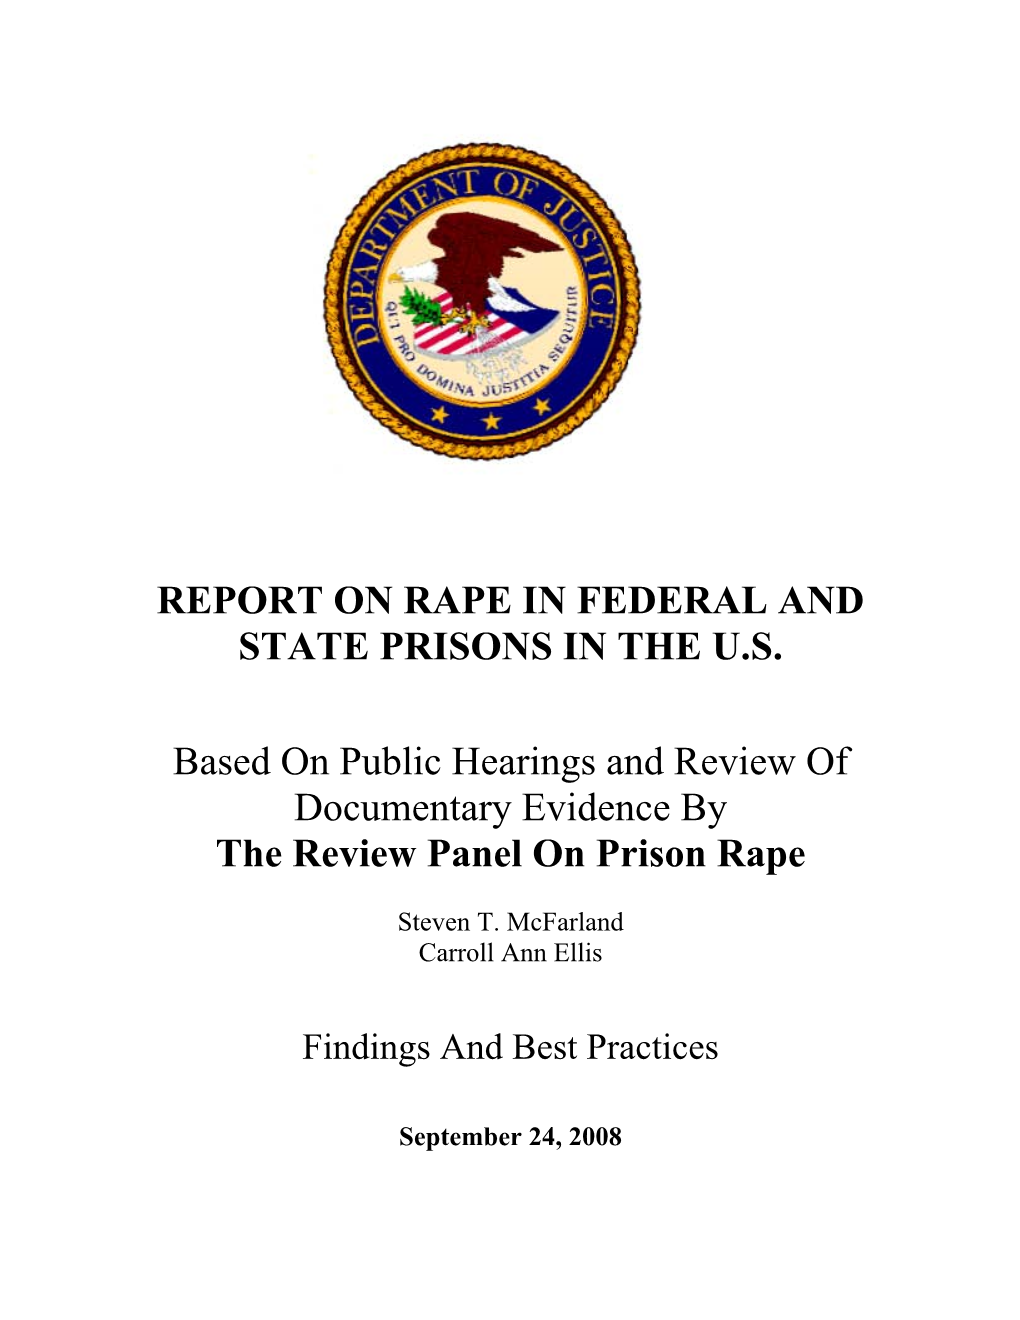 Report on Rape in Federal and State Prisons in the U.S